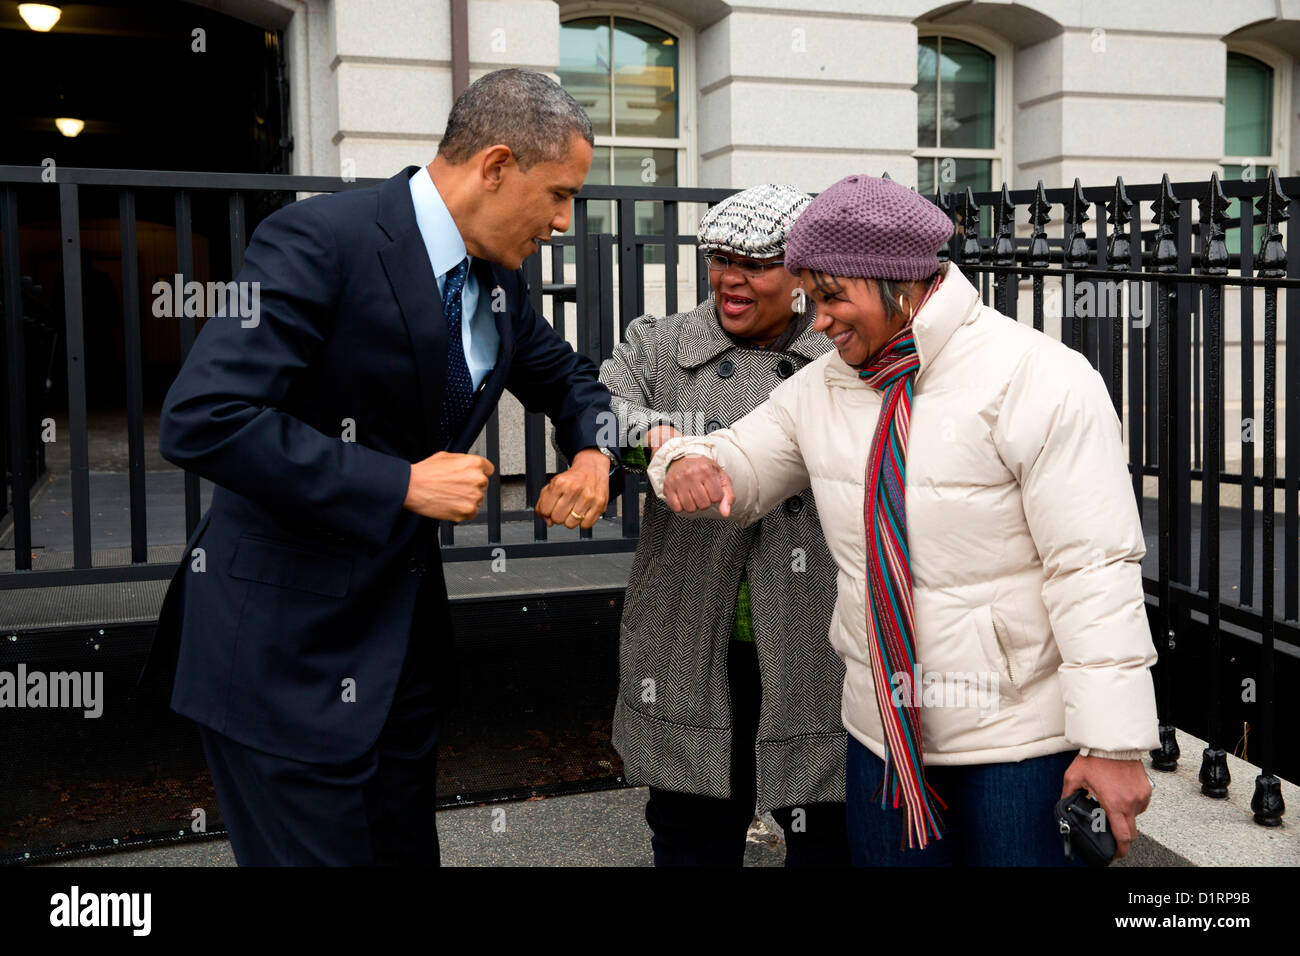 US President Barack Obama greets a couple of government workers with an elbow bump following remarks on the fiscal cliff negotiations as he walked back to the White House December 31, 2012 in Washington, DC. Stock Photo